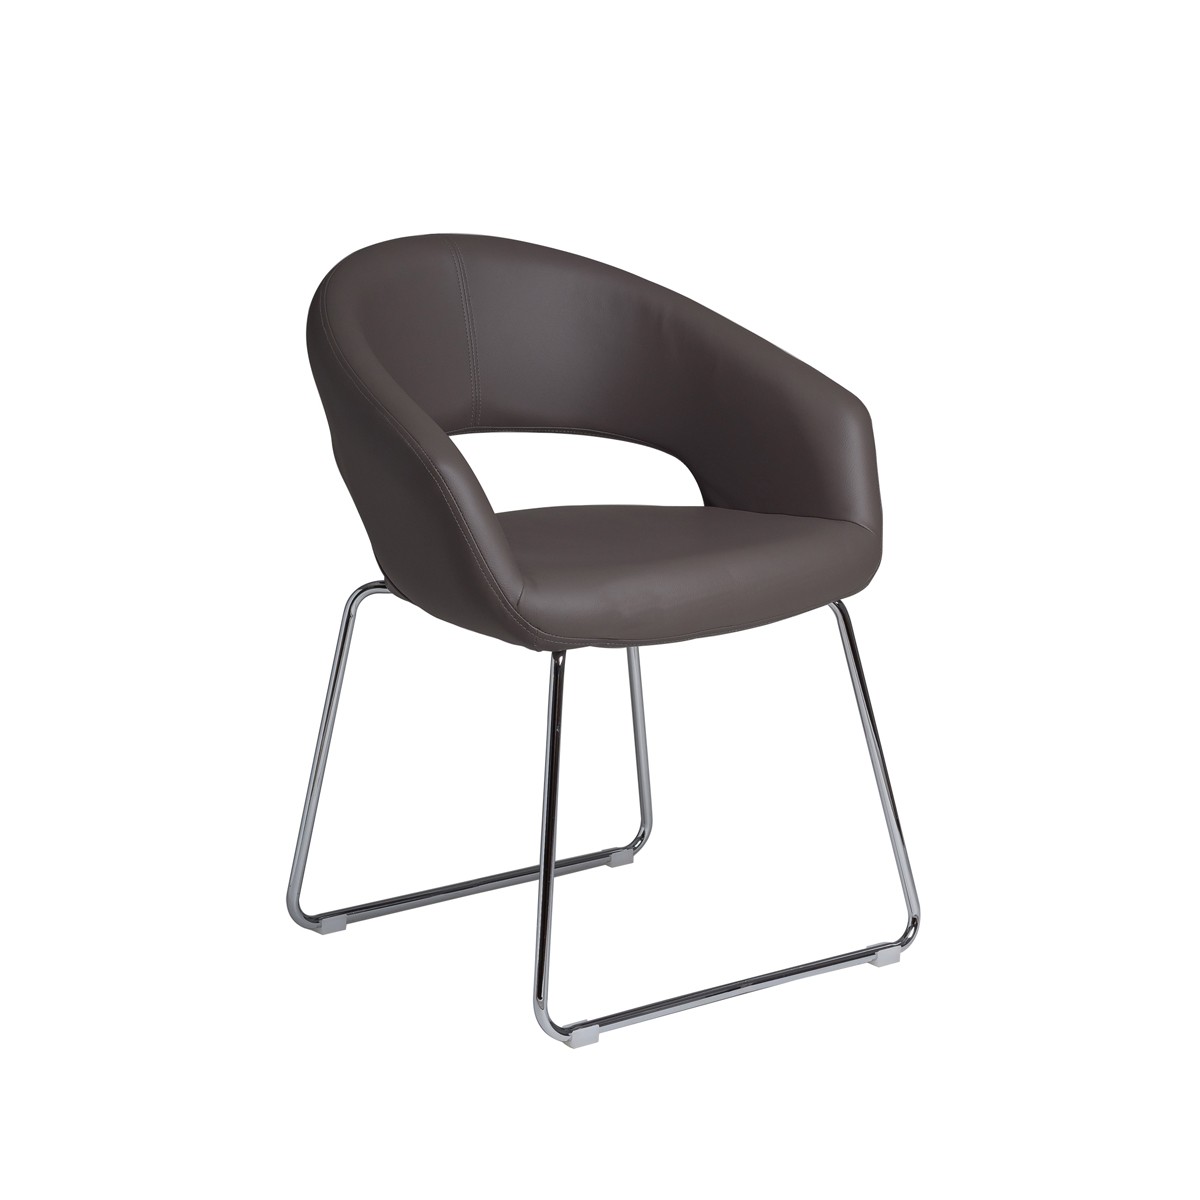 Nutshell Taupe Dining Chair with Chrome Legs